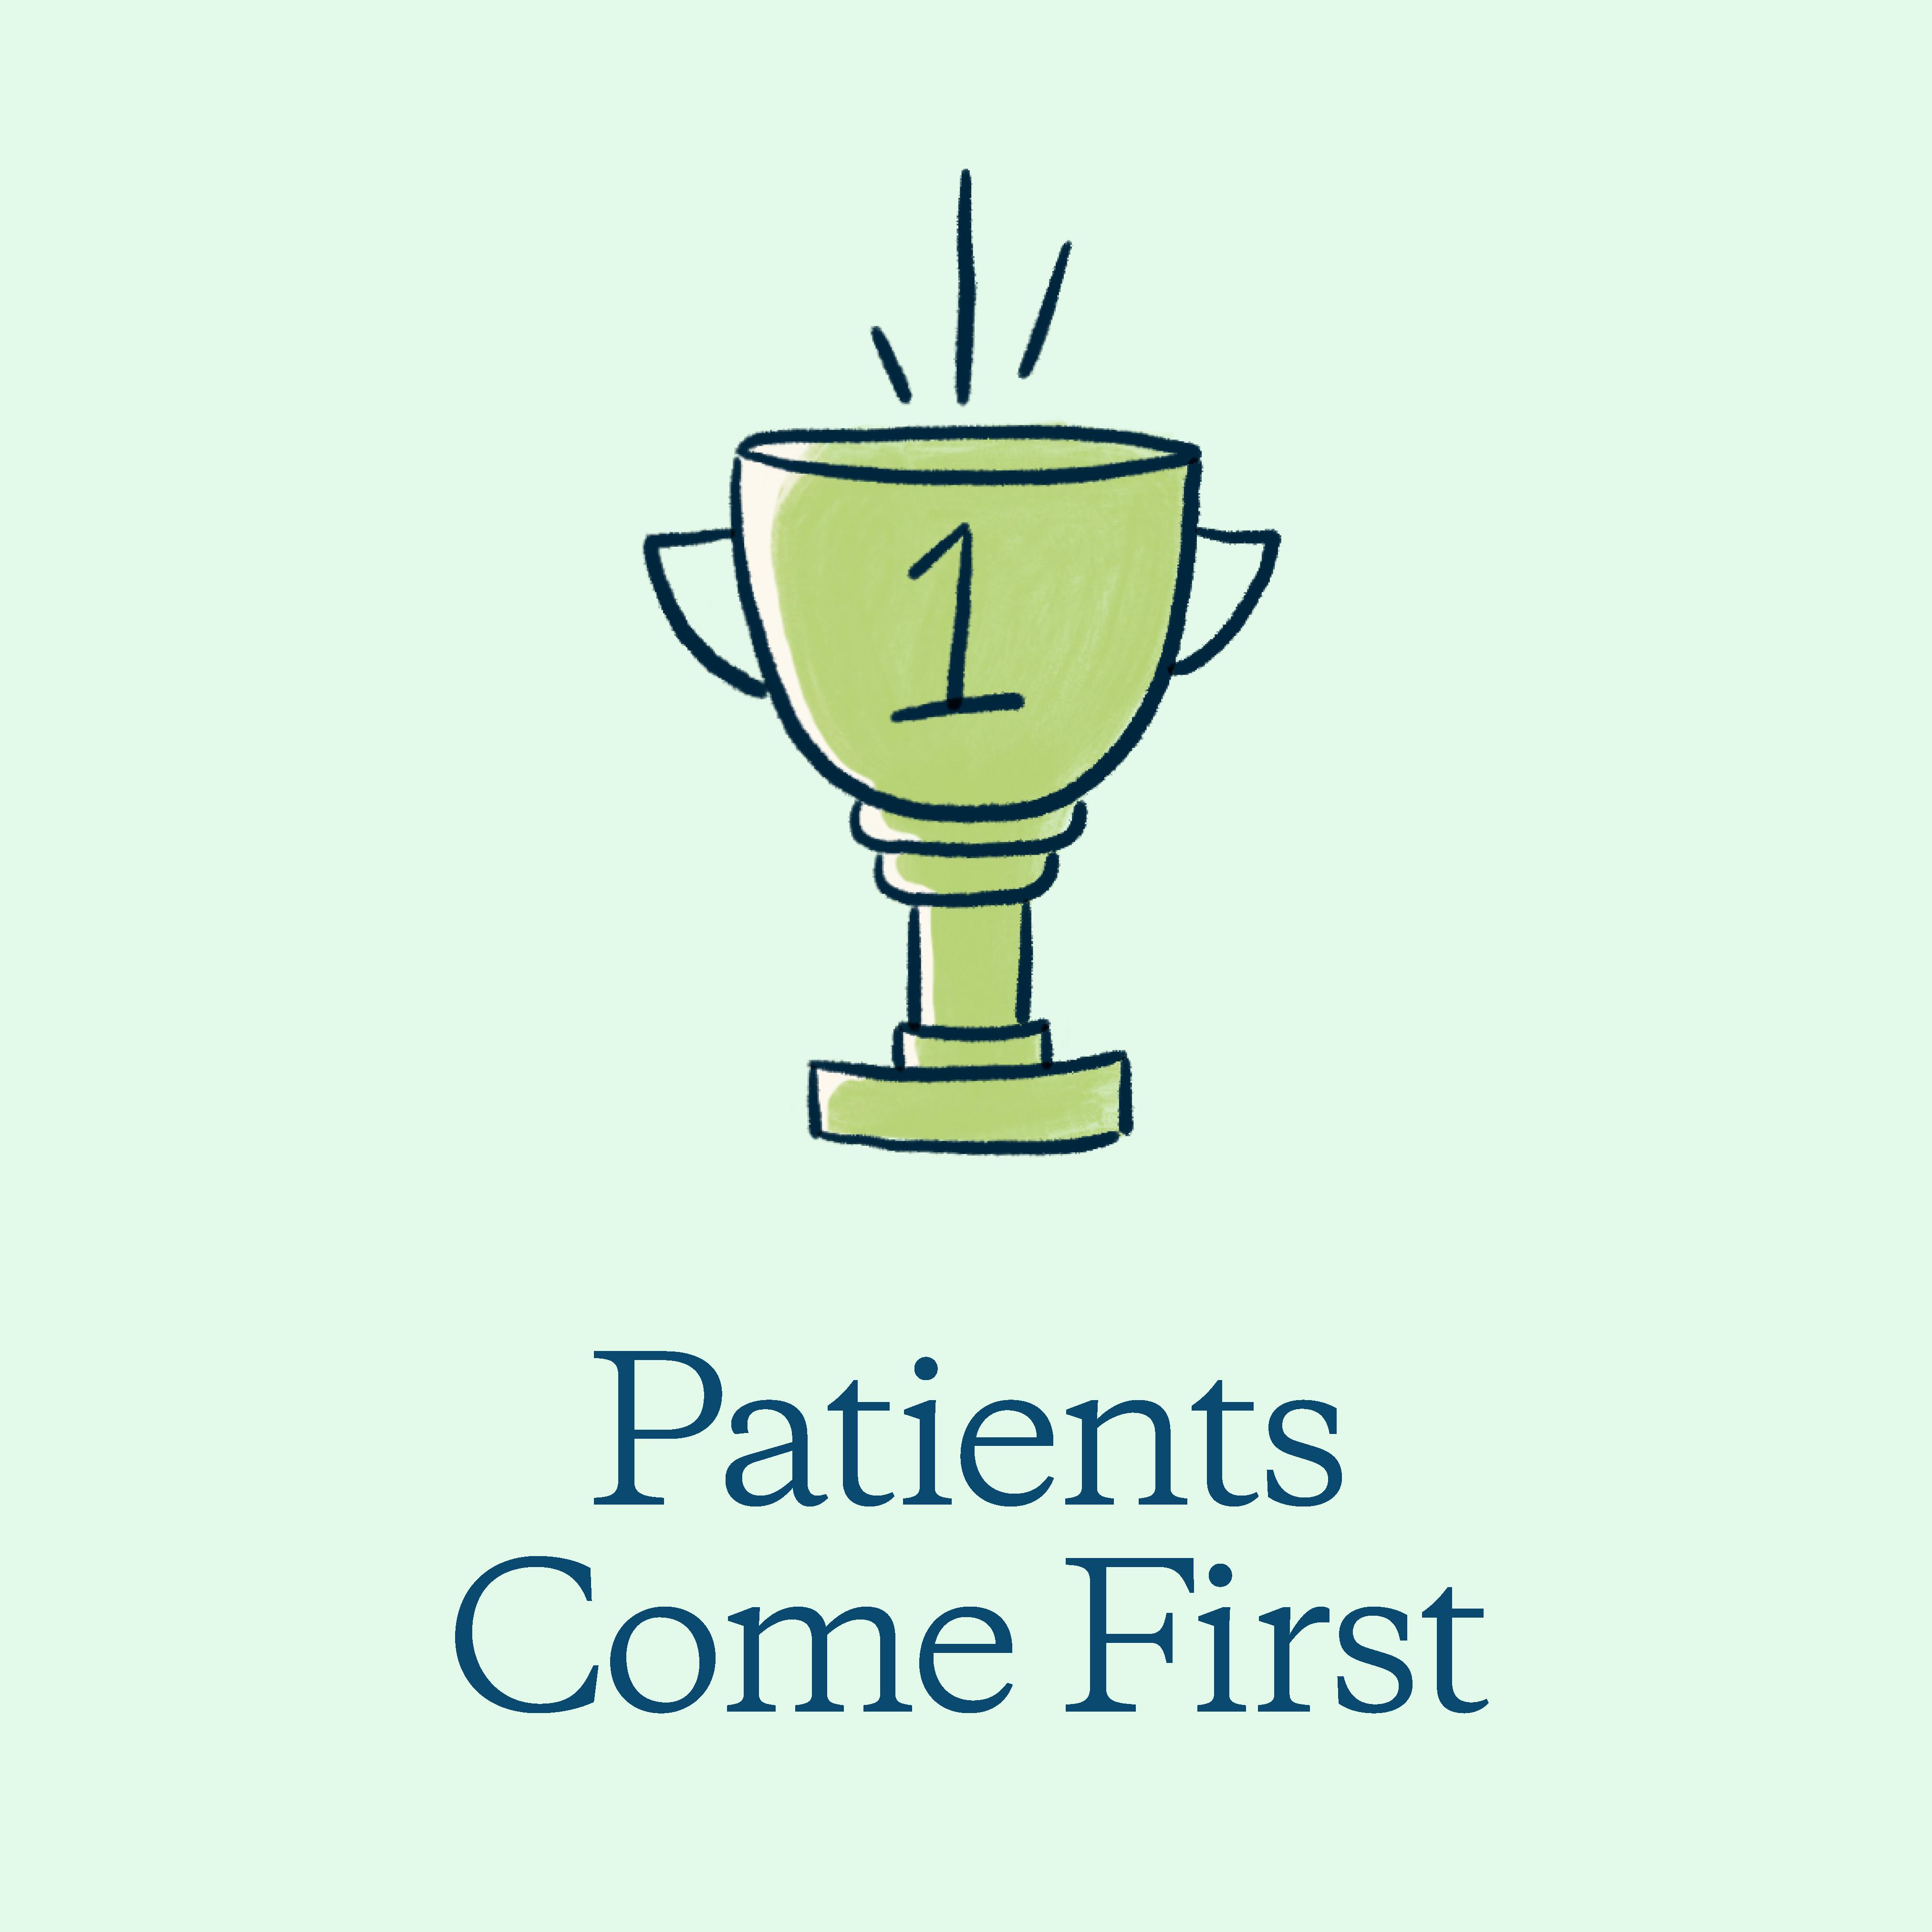 Patients come first